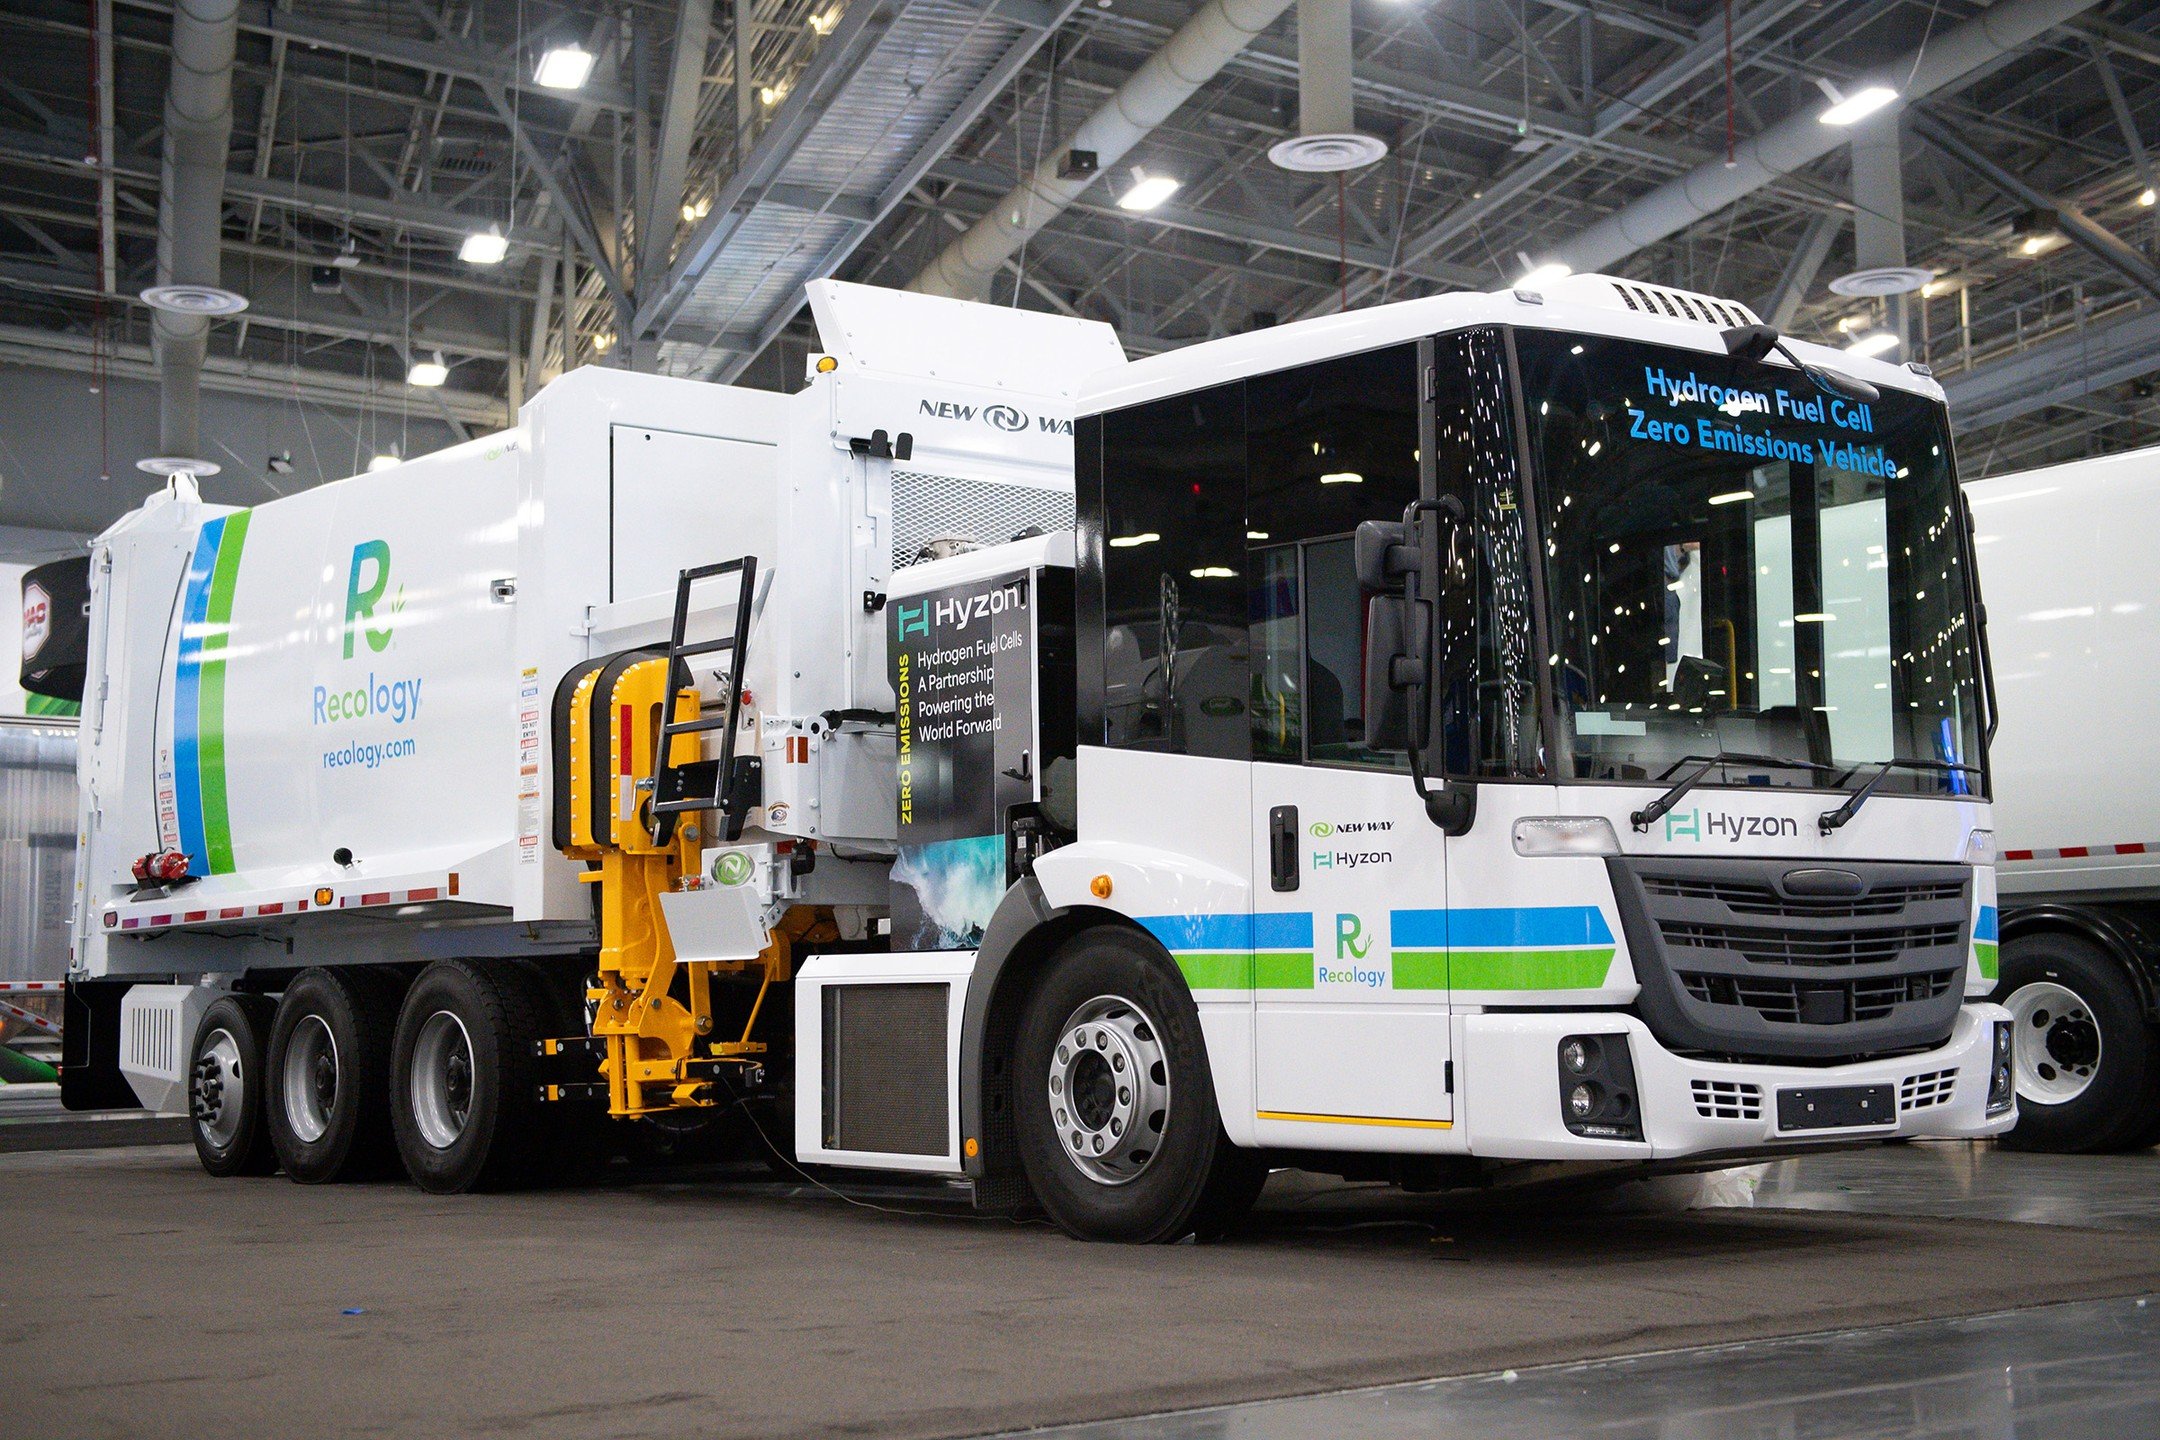 We are proud to unveil North America's first hydrogen fuel cell-powered refuse truck at @wasteexpo, developed in collaboration with our partner, @newwaytrucks. This marks a major moment in our journey to begin the new industrial revolution. 

Built t